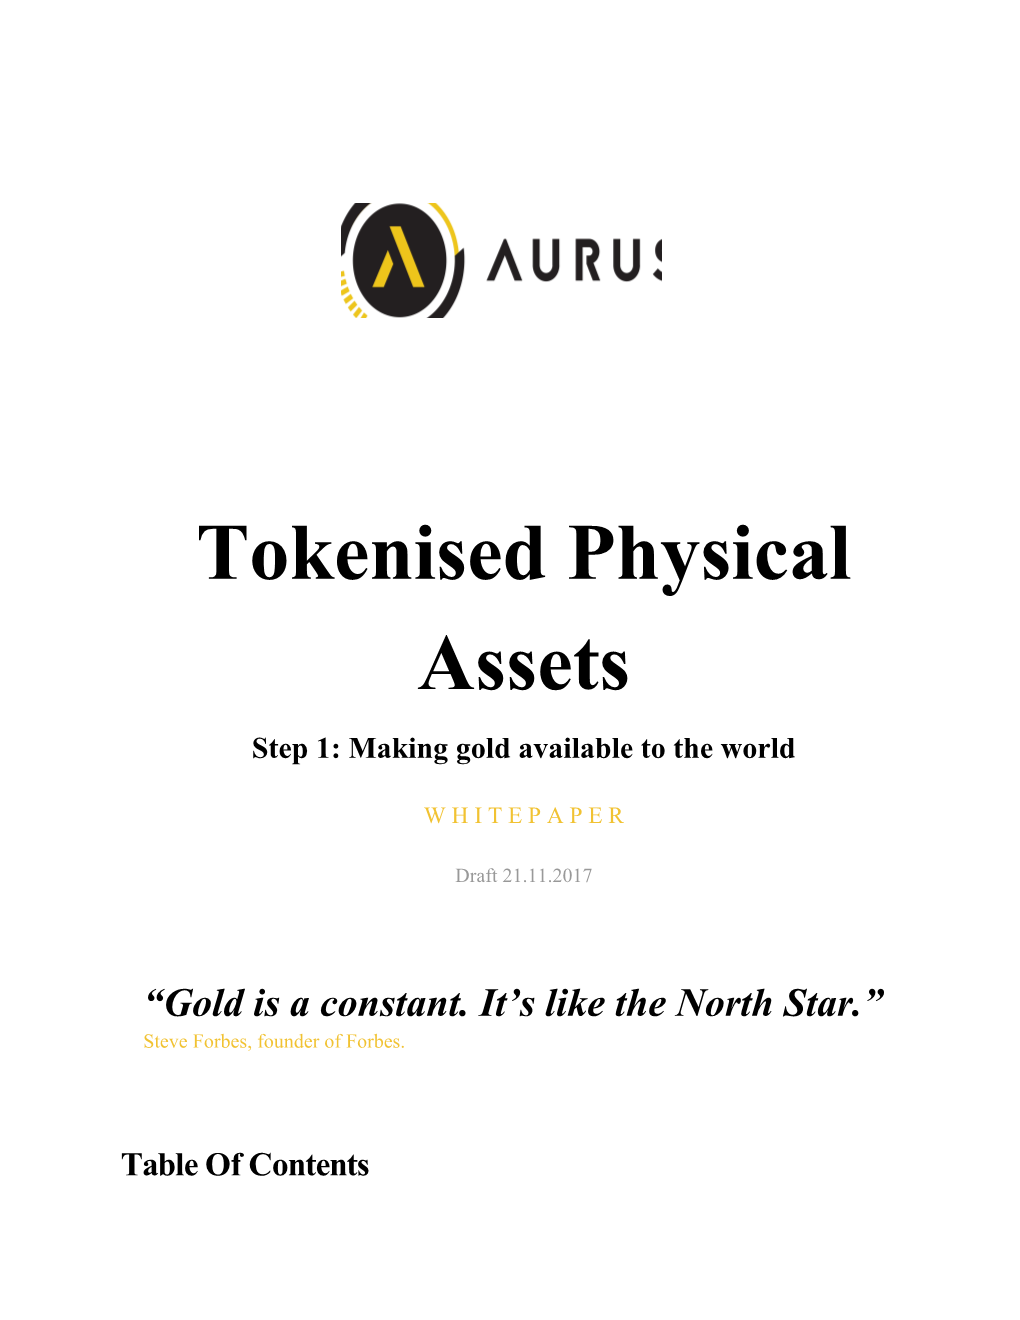 Step 1: Making Gold Available to the World